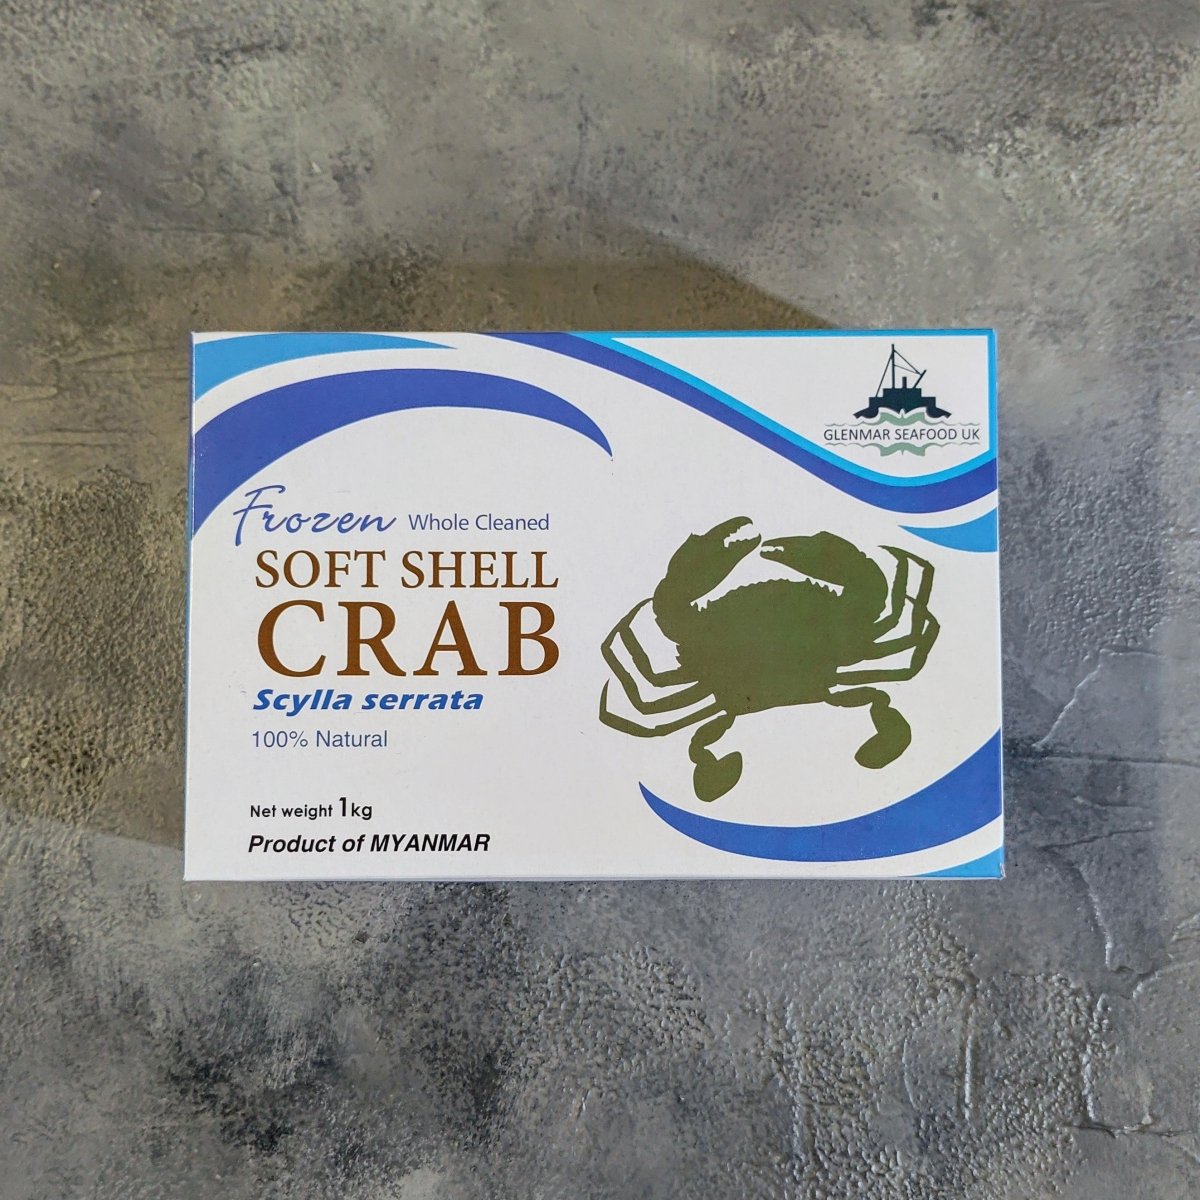 SOFT SHELL CRABS Mediums (18) - Seafood Direct UK